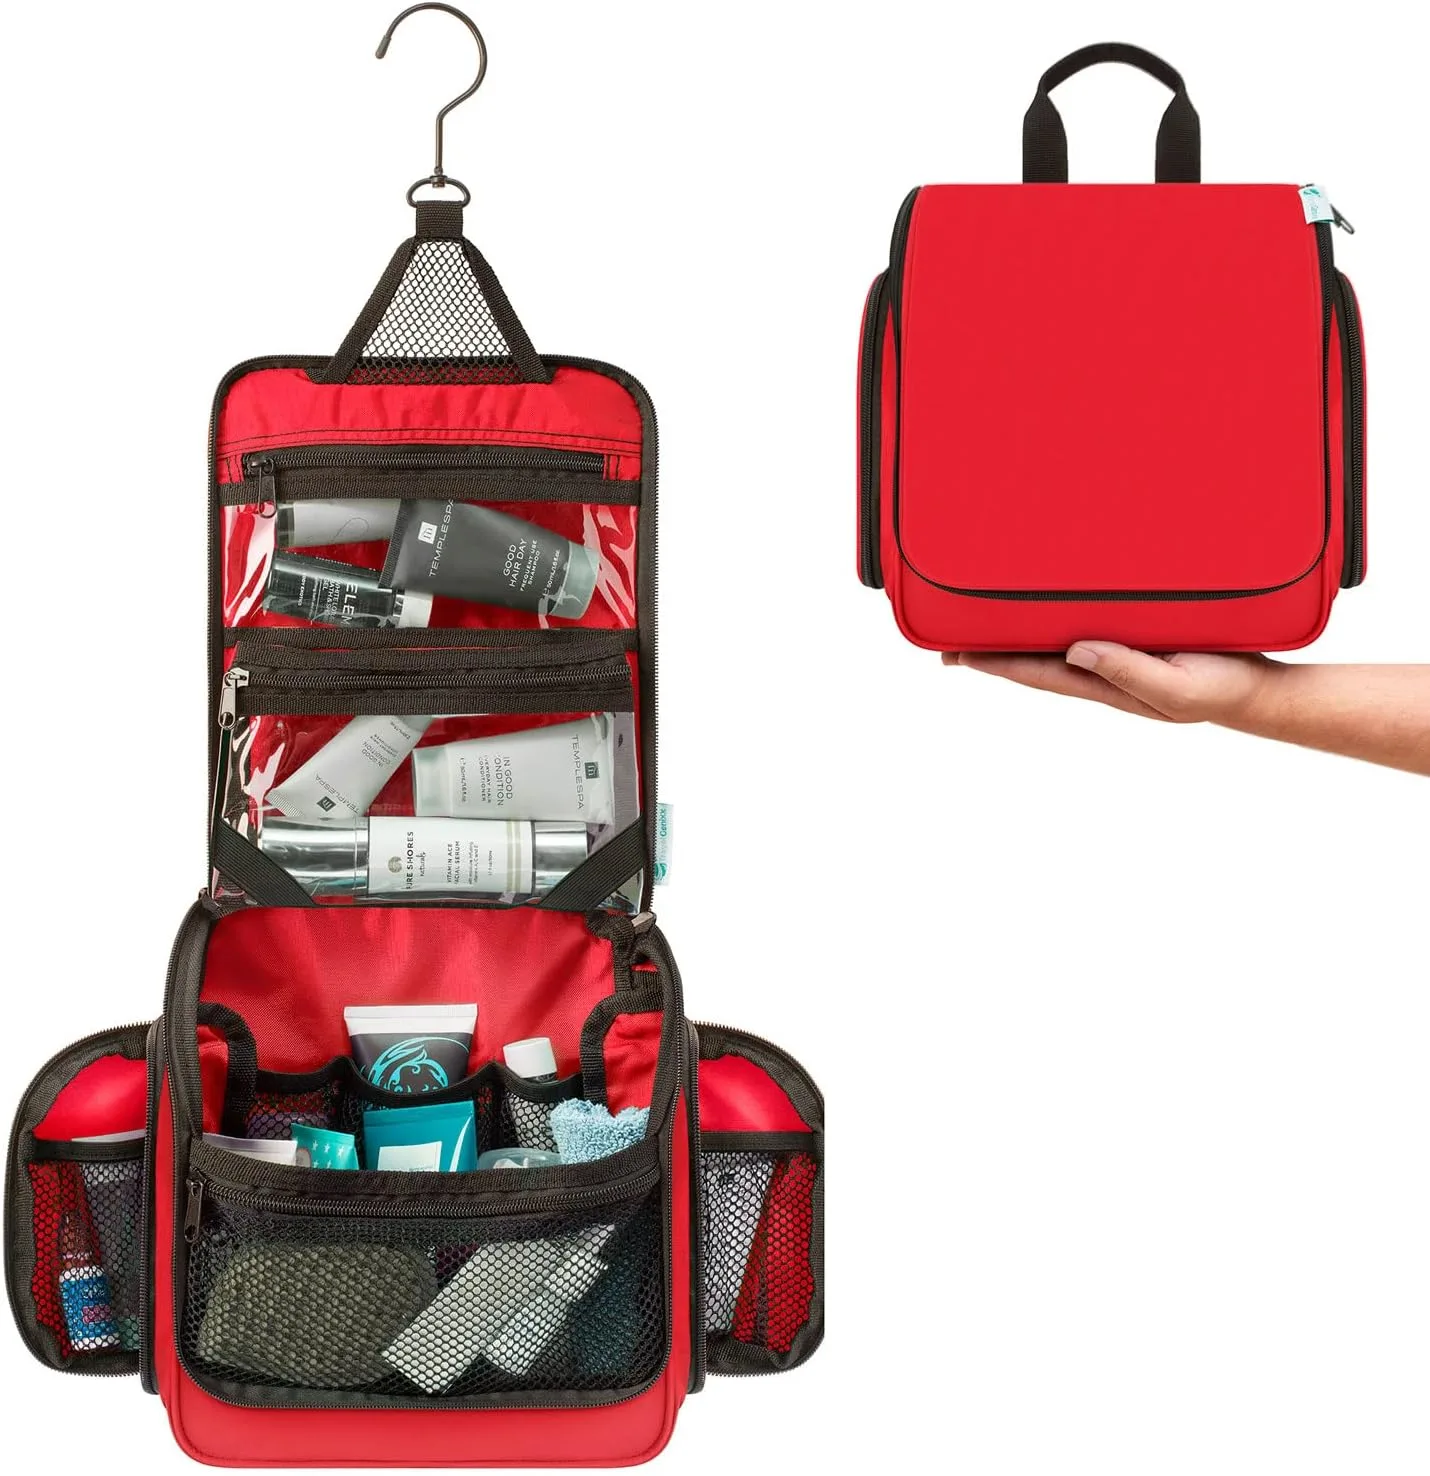 this large organizer bag lets you carry all your toiletries, make-up and vitamins in one space and to see everything you've packed. 